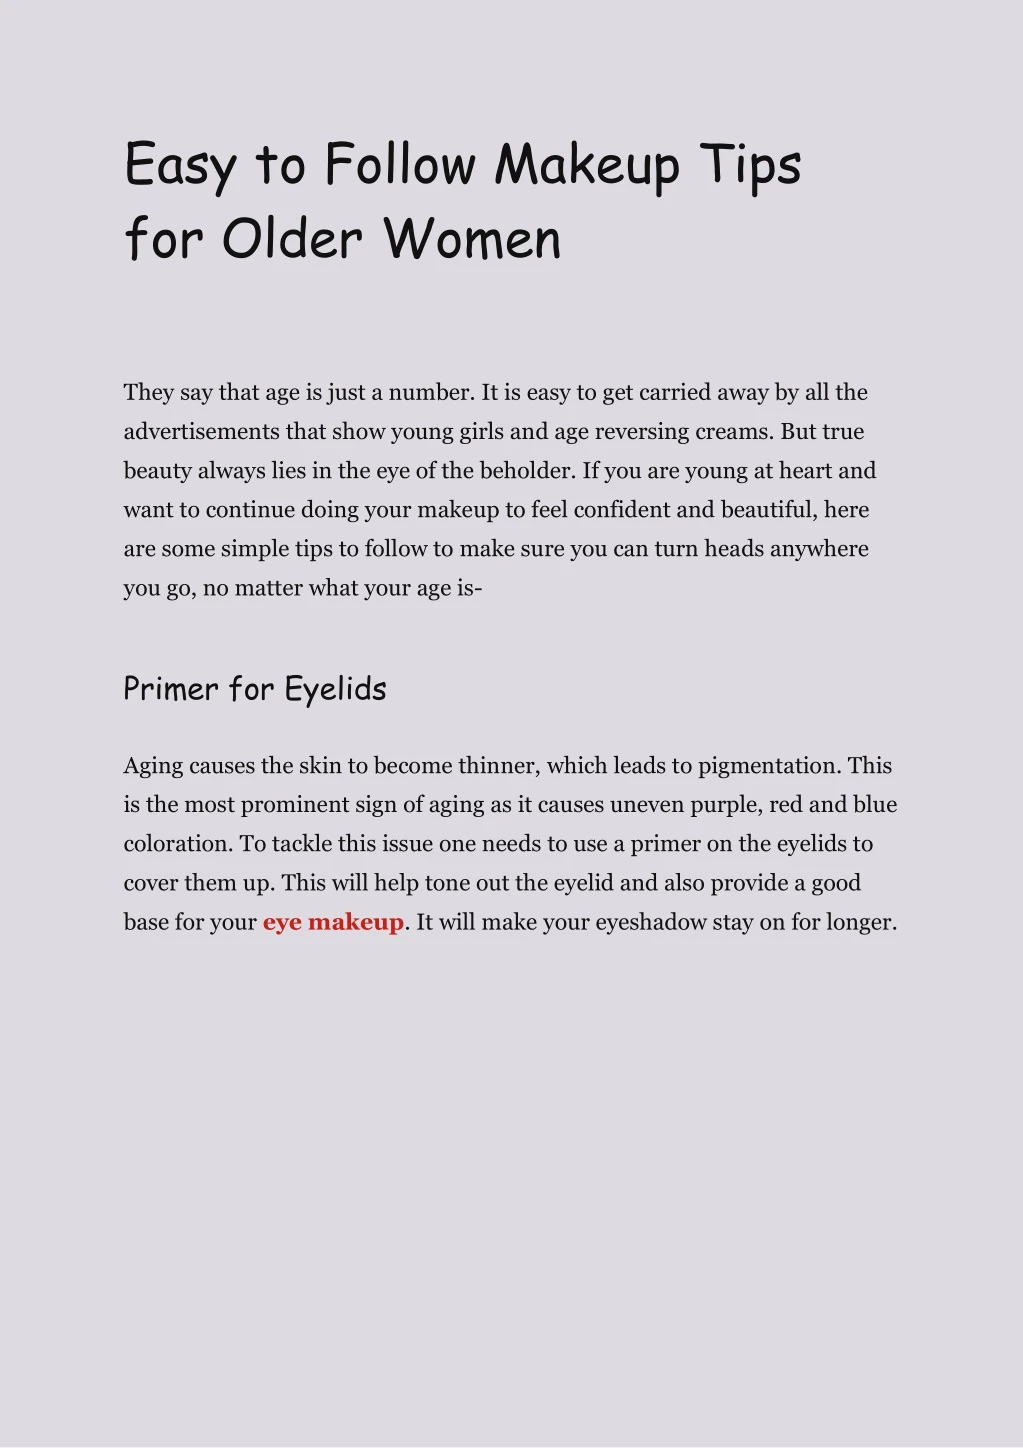 easy to follow makeup tips for older women